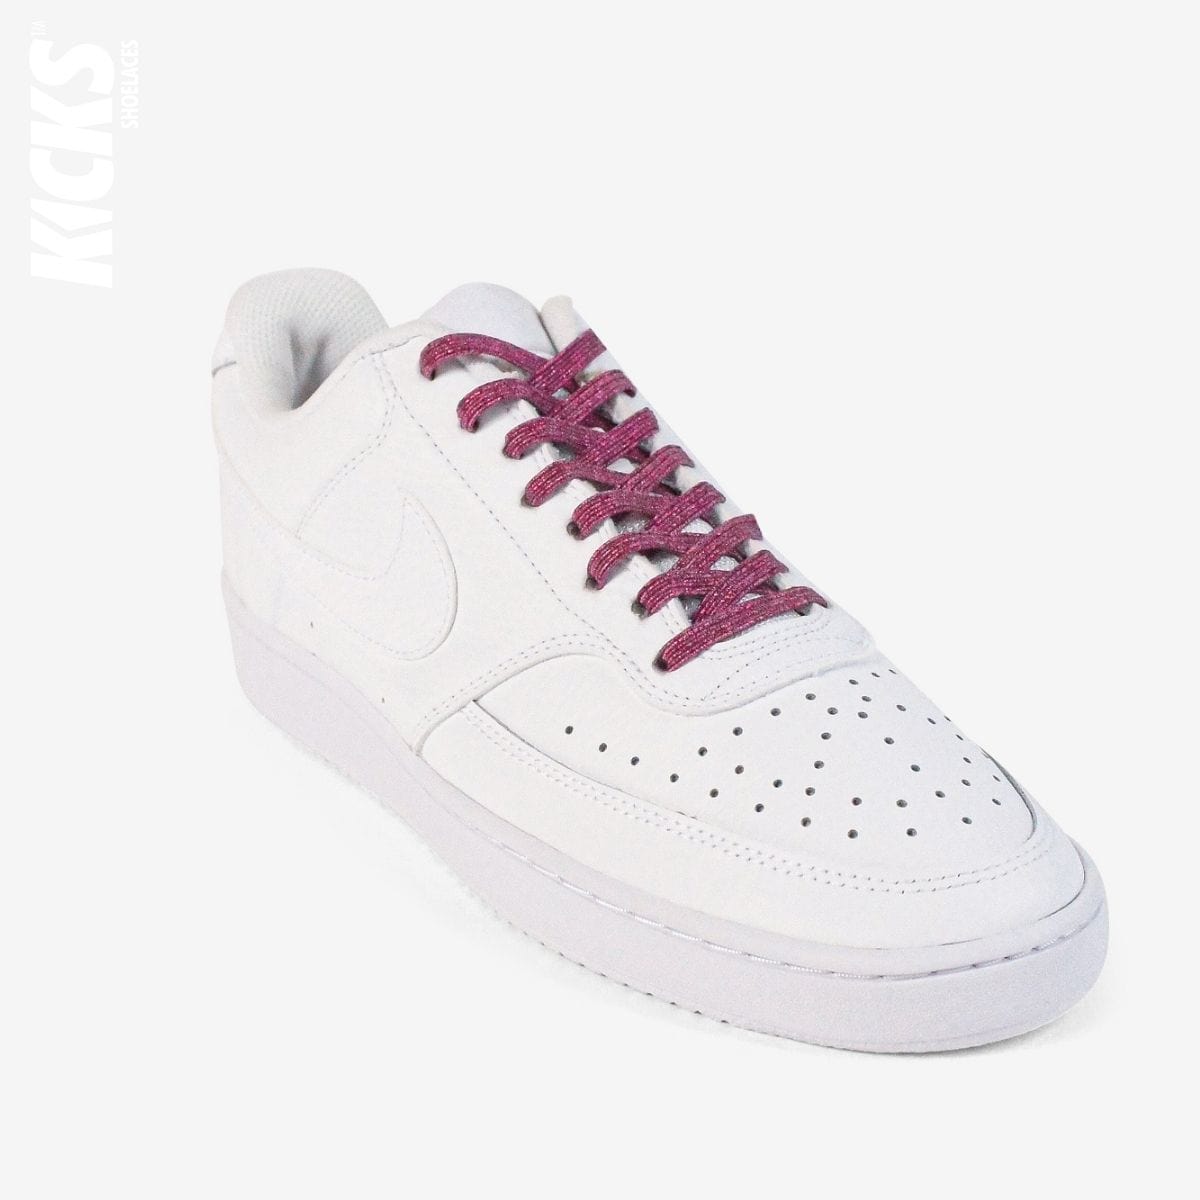 elastic-no-tie-shoelaces-with-rose-pink-laces-on-nike-white-sneakers